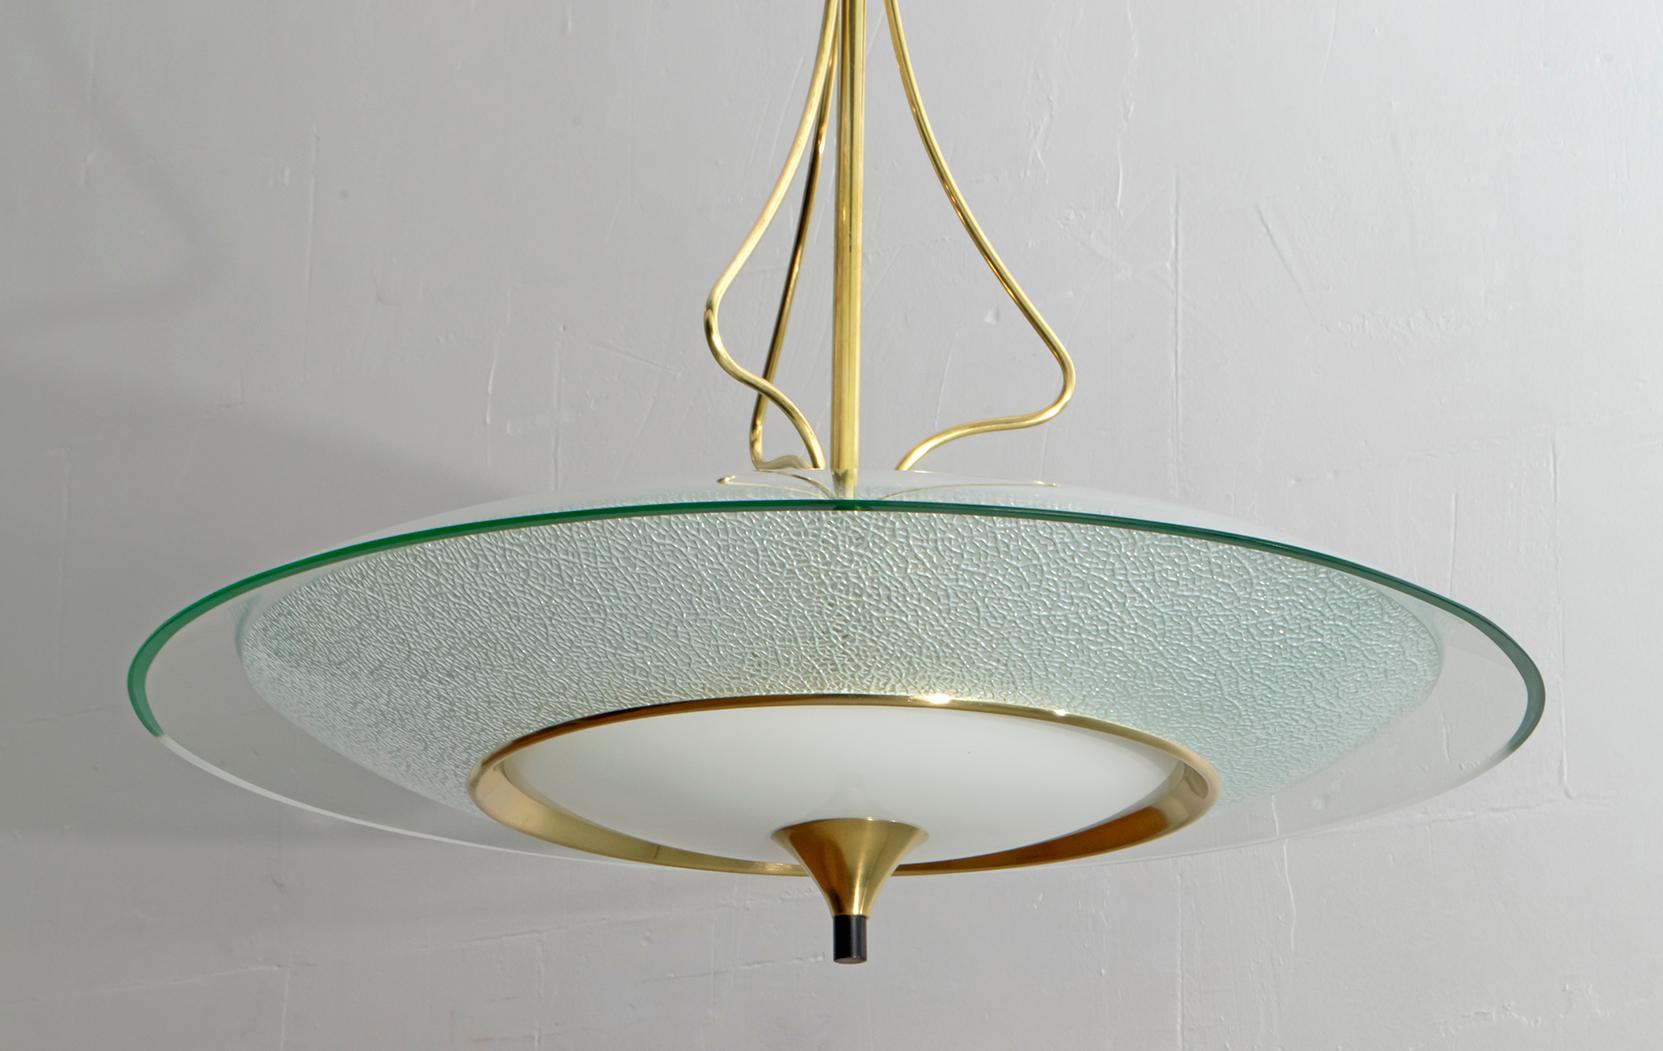 This Mid-Century glass and brass chandelier was designed by Pietro Chiesa for Fontana Arte in the 1940s.

The Italian Art Deco designer Pietro Chiesa was born in Milan in 1892 in a family of artists originally from Ticino, Switzerland. After his